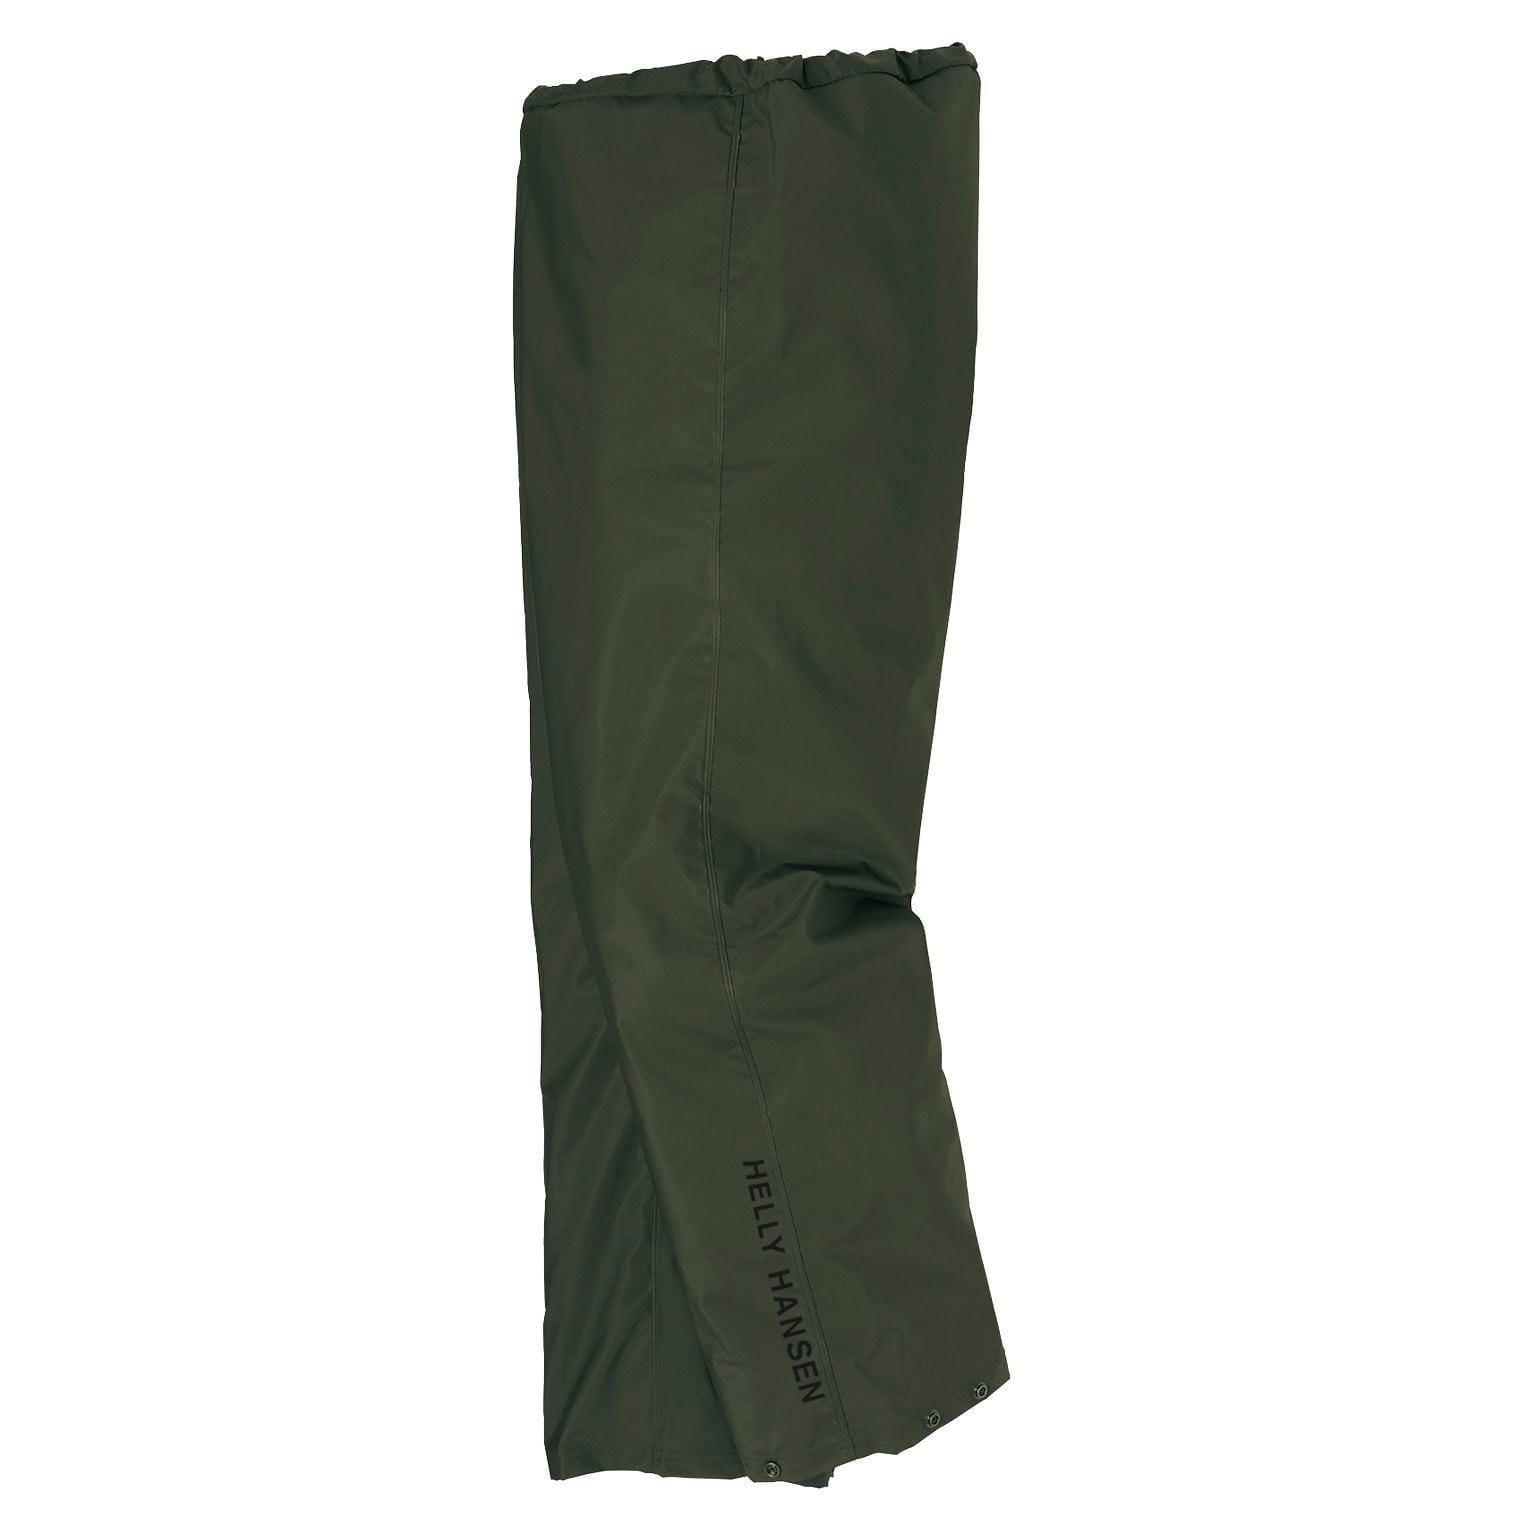 Helly Hansen Jr Juell Rain Pant  70  Buy Trousers from Helly Hansen  online at Booztcom Fast delivery and easy returns